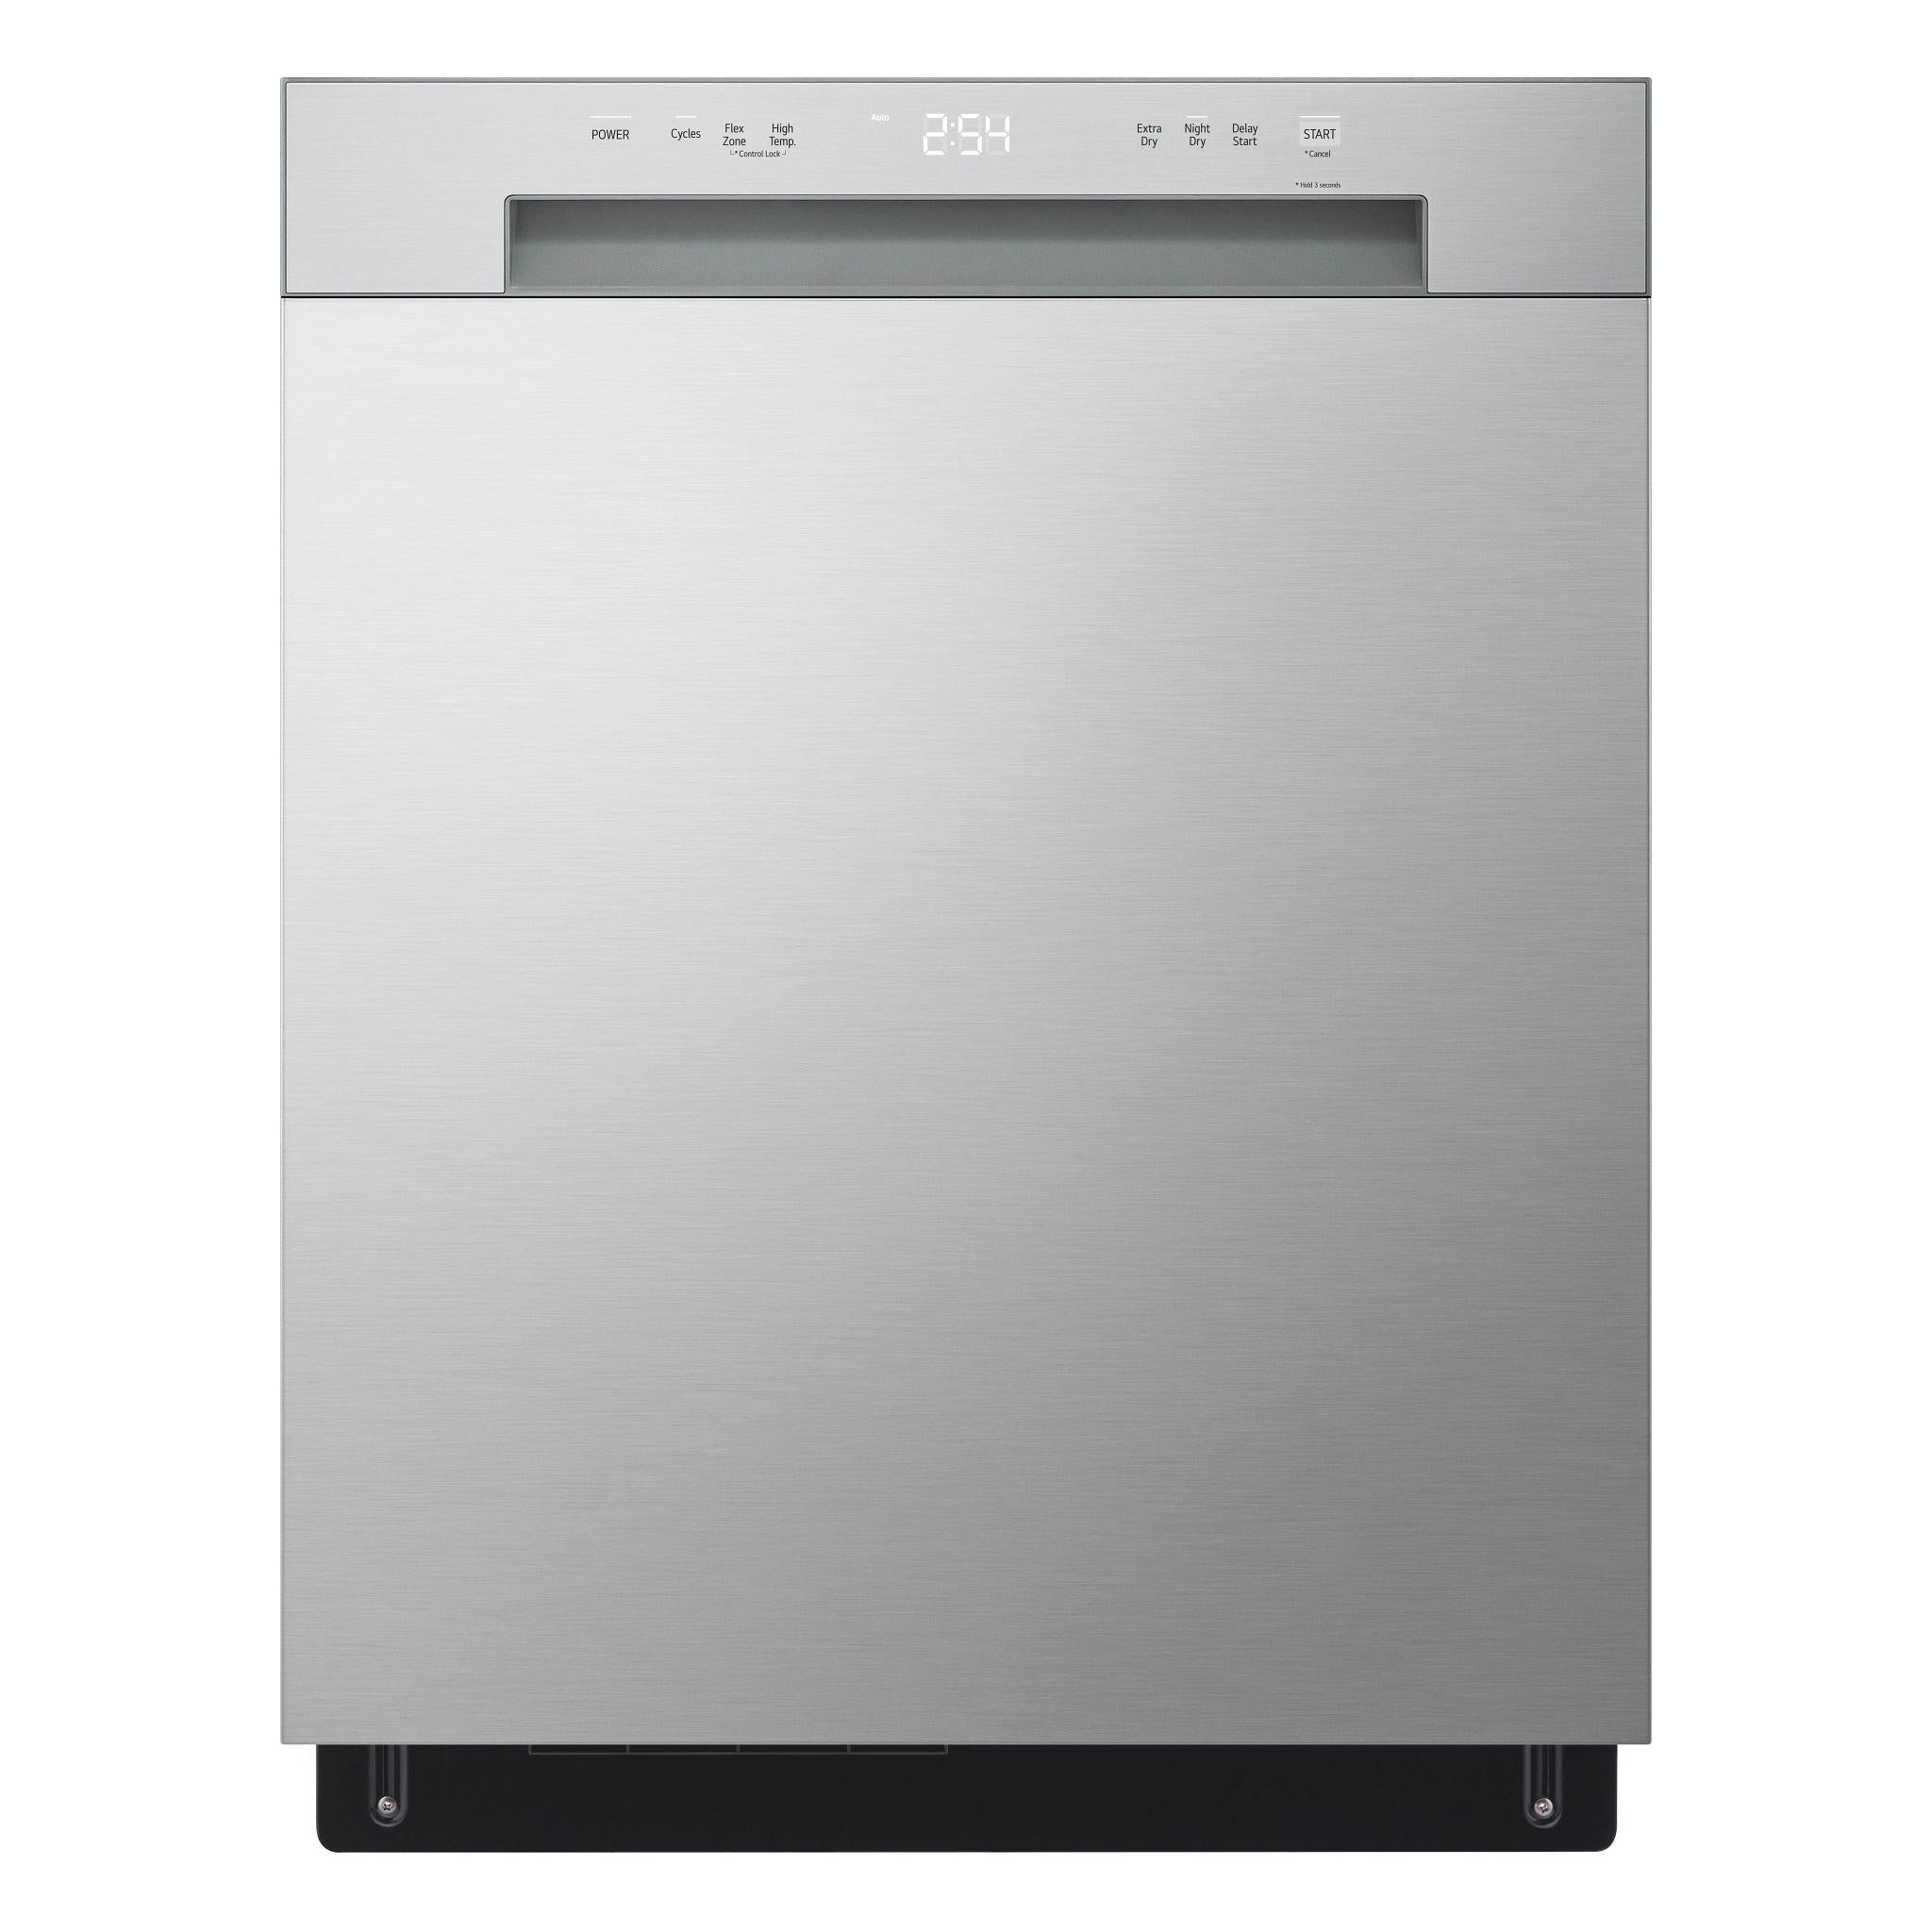 Lg LDFC2423V Front Control Dishwasher With Lodecibel Operation And Dynamic Dry™